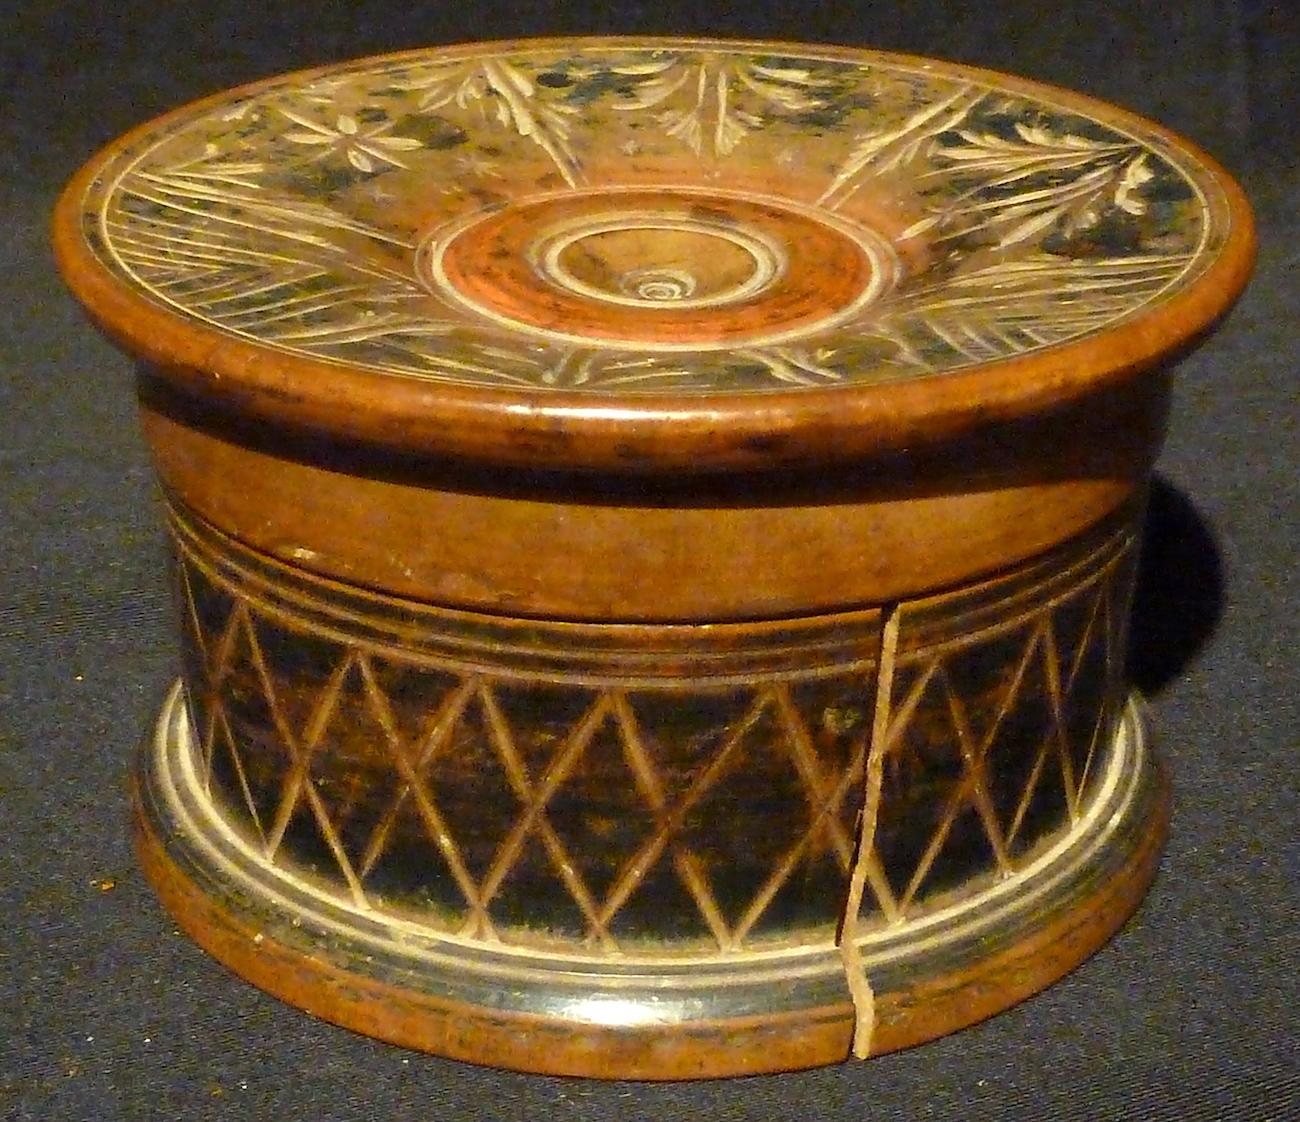 SHIPPING POLICY:
No additional costs will be added to this order.
Shipping costs will be totally covered by the seller (customs duties included). 

Small box, central Italy, 17th century, in lacquered and carved wood of monastic production, with